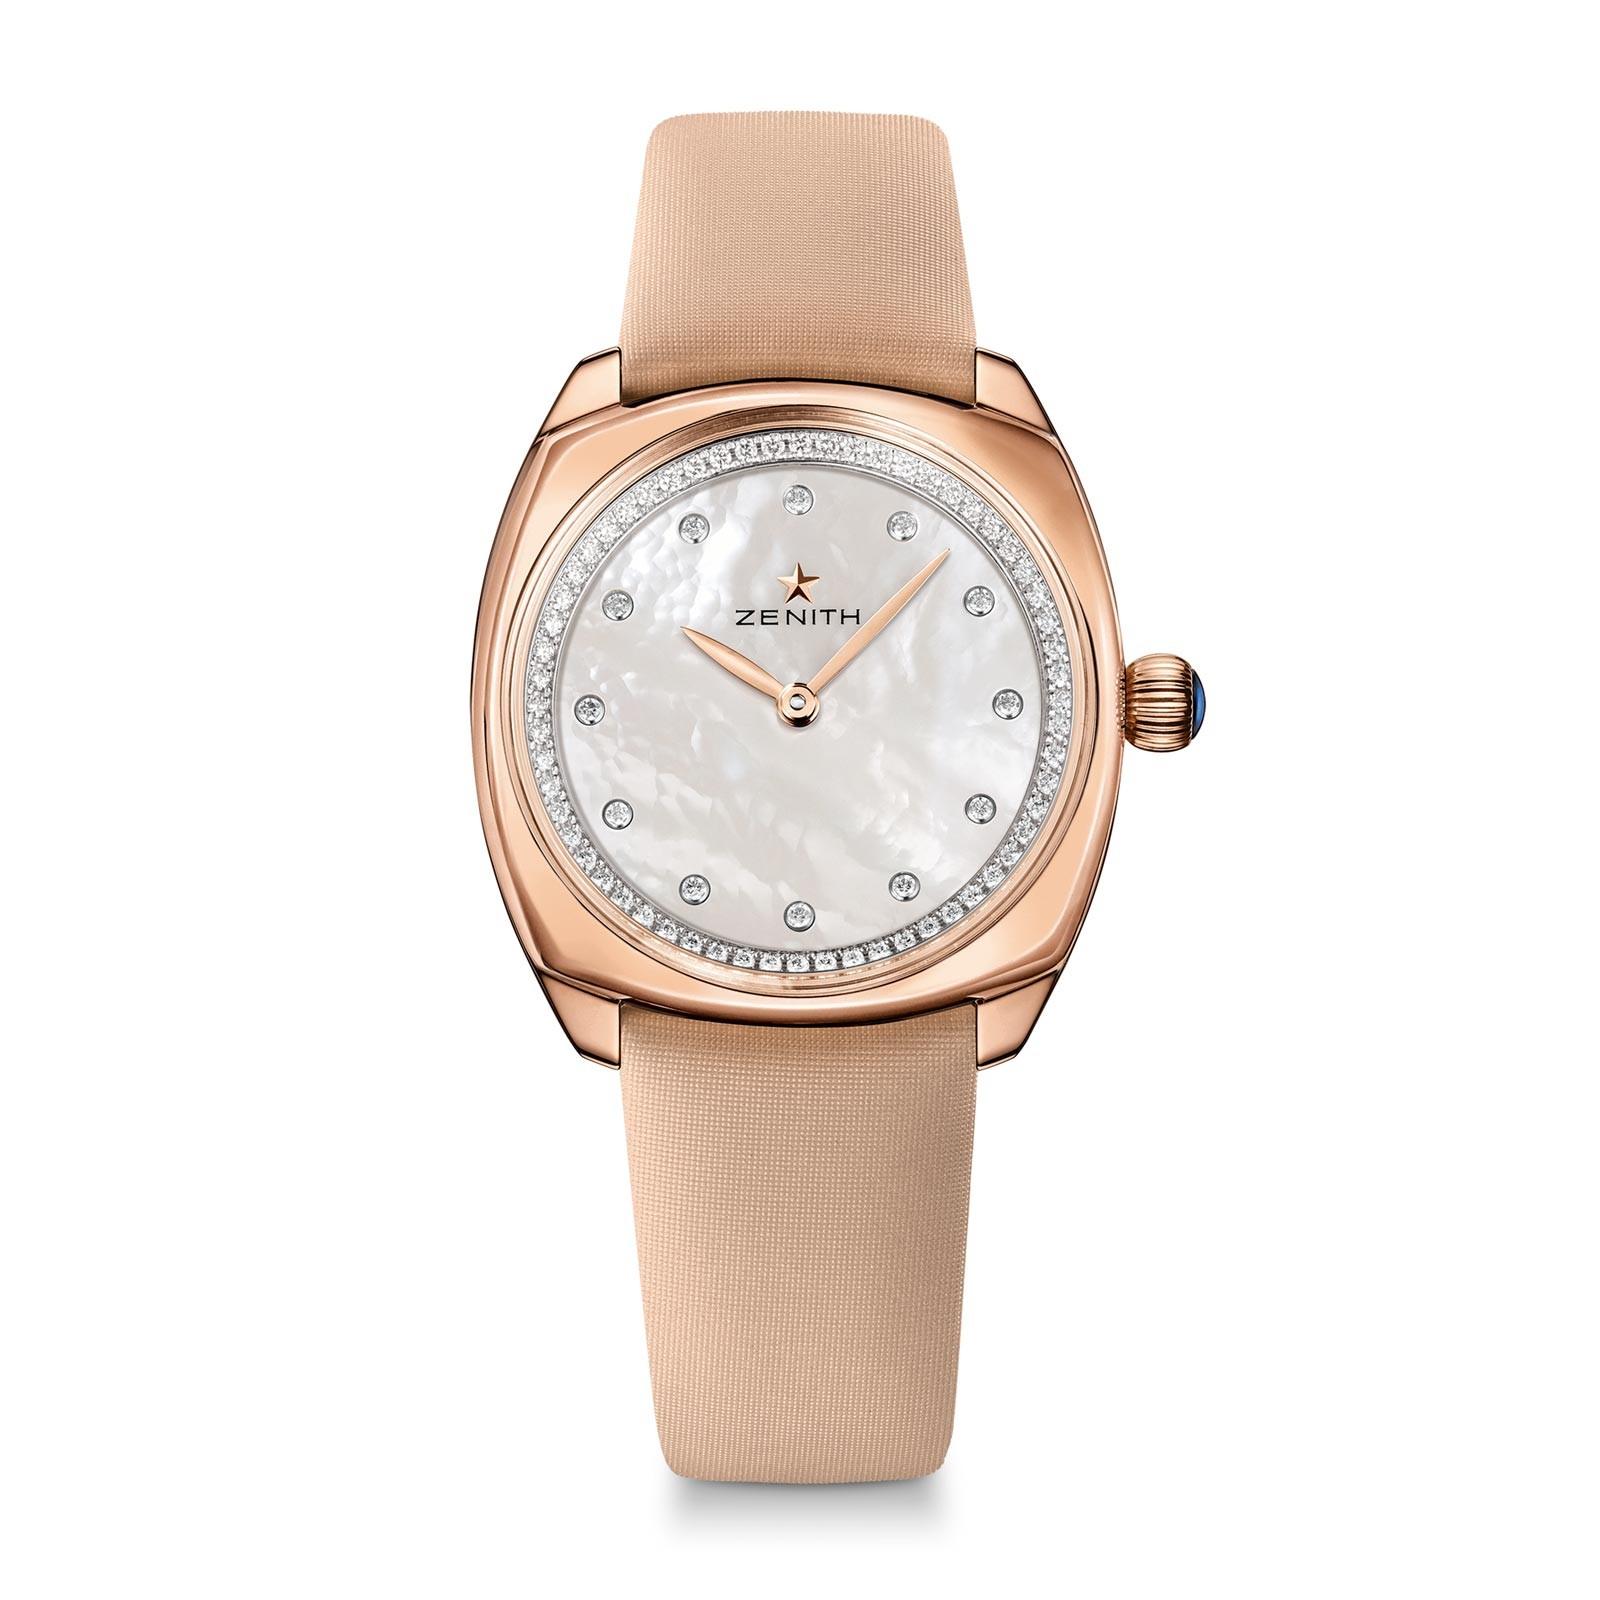 Star Elite Ladies 33mm Automatic in Rose Gold with Diamonds On Beige Satin Strap with Mother of Pearl Diamond Dial